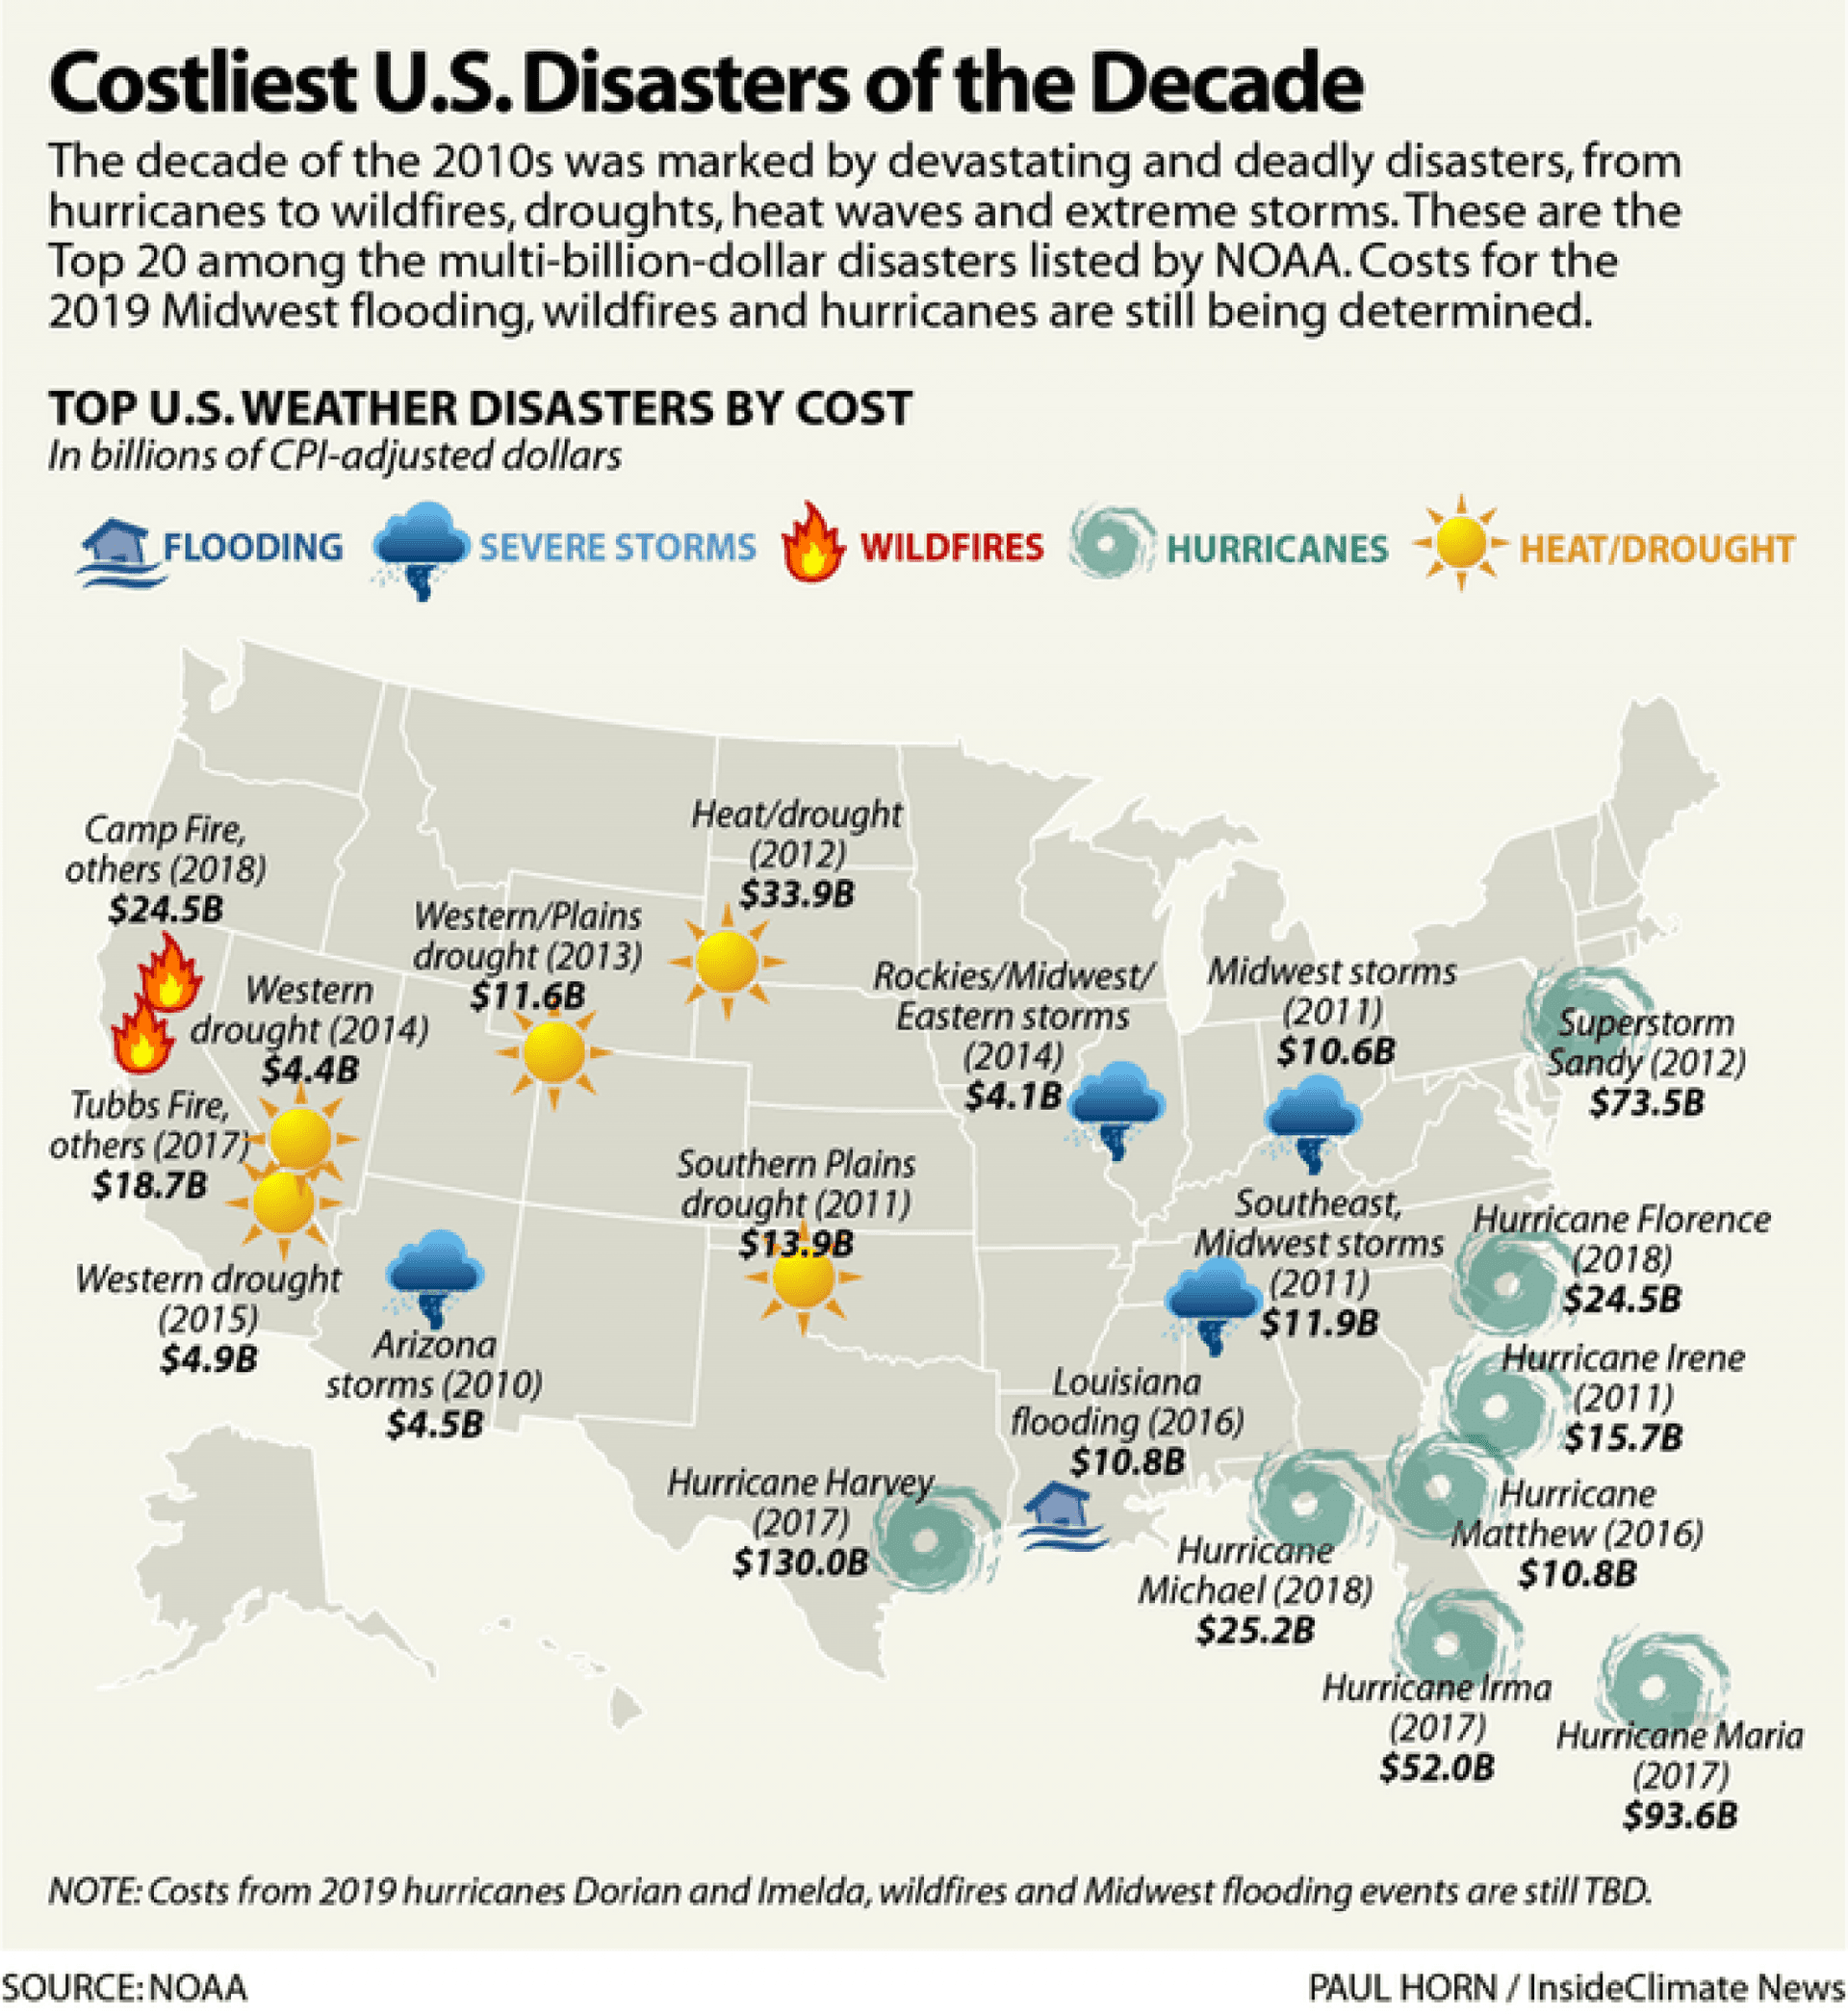 A map of the US showing environmental disasters and their associated costs.